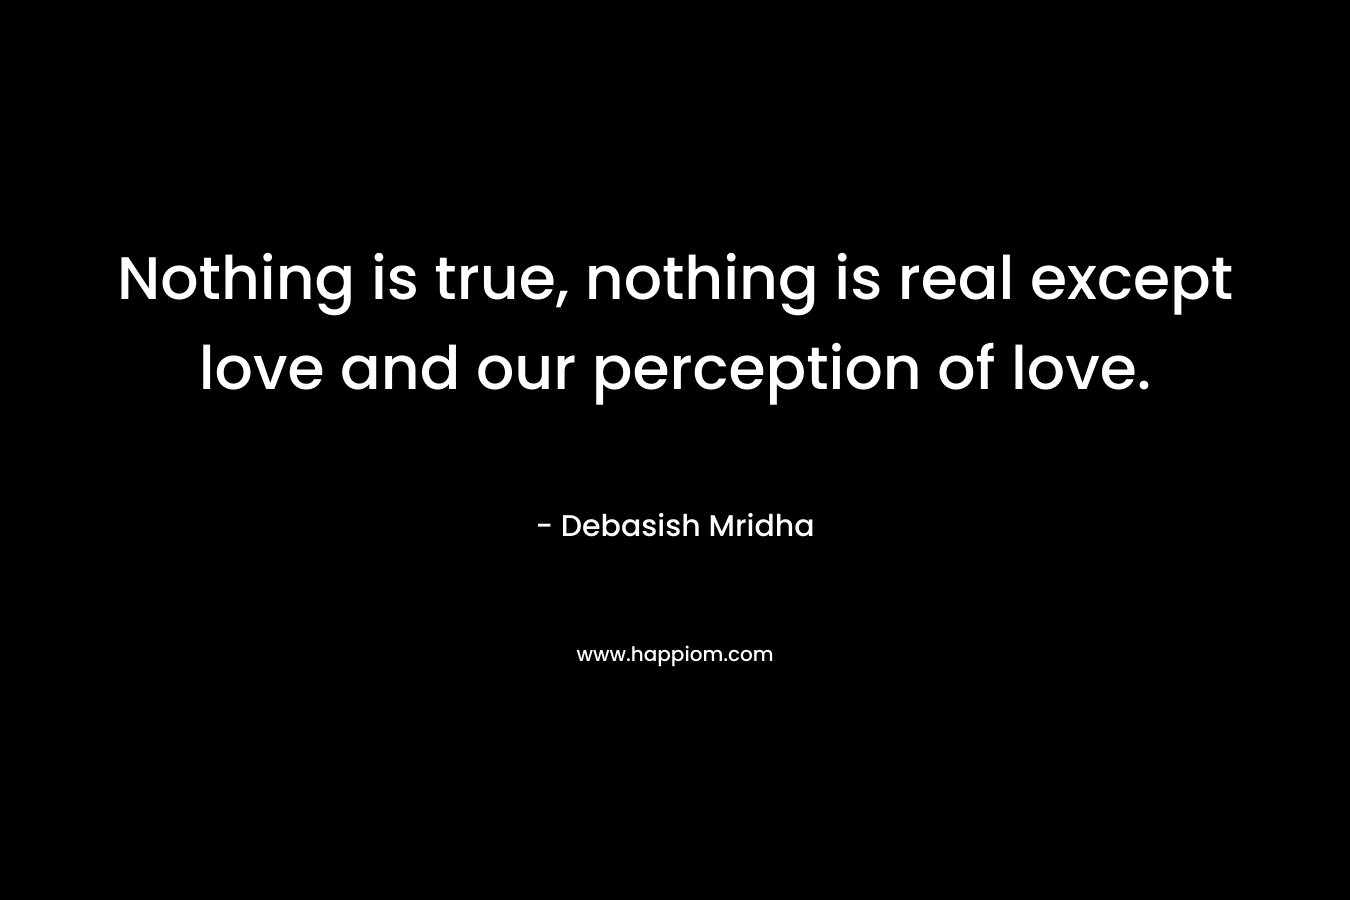 Nothing is true, nothing is real except love and our perception of love. – Debasish Mridha